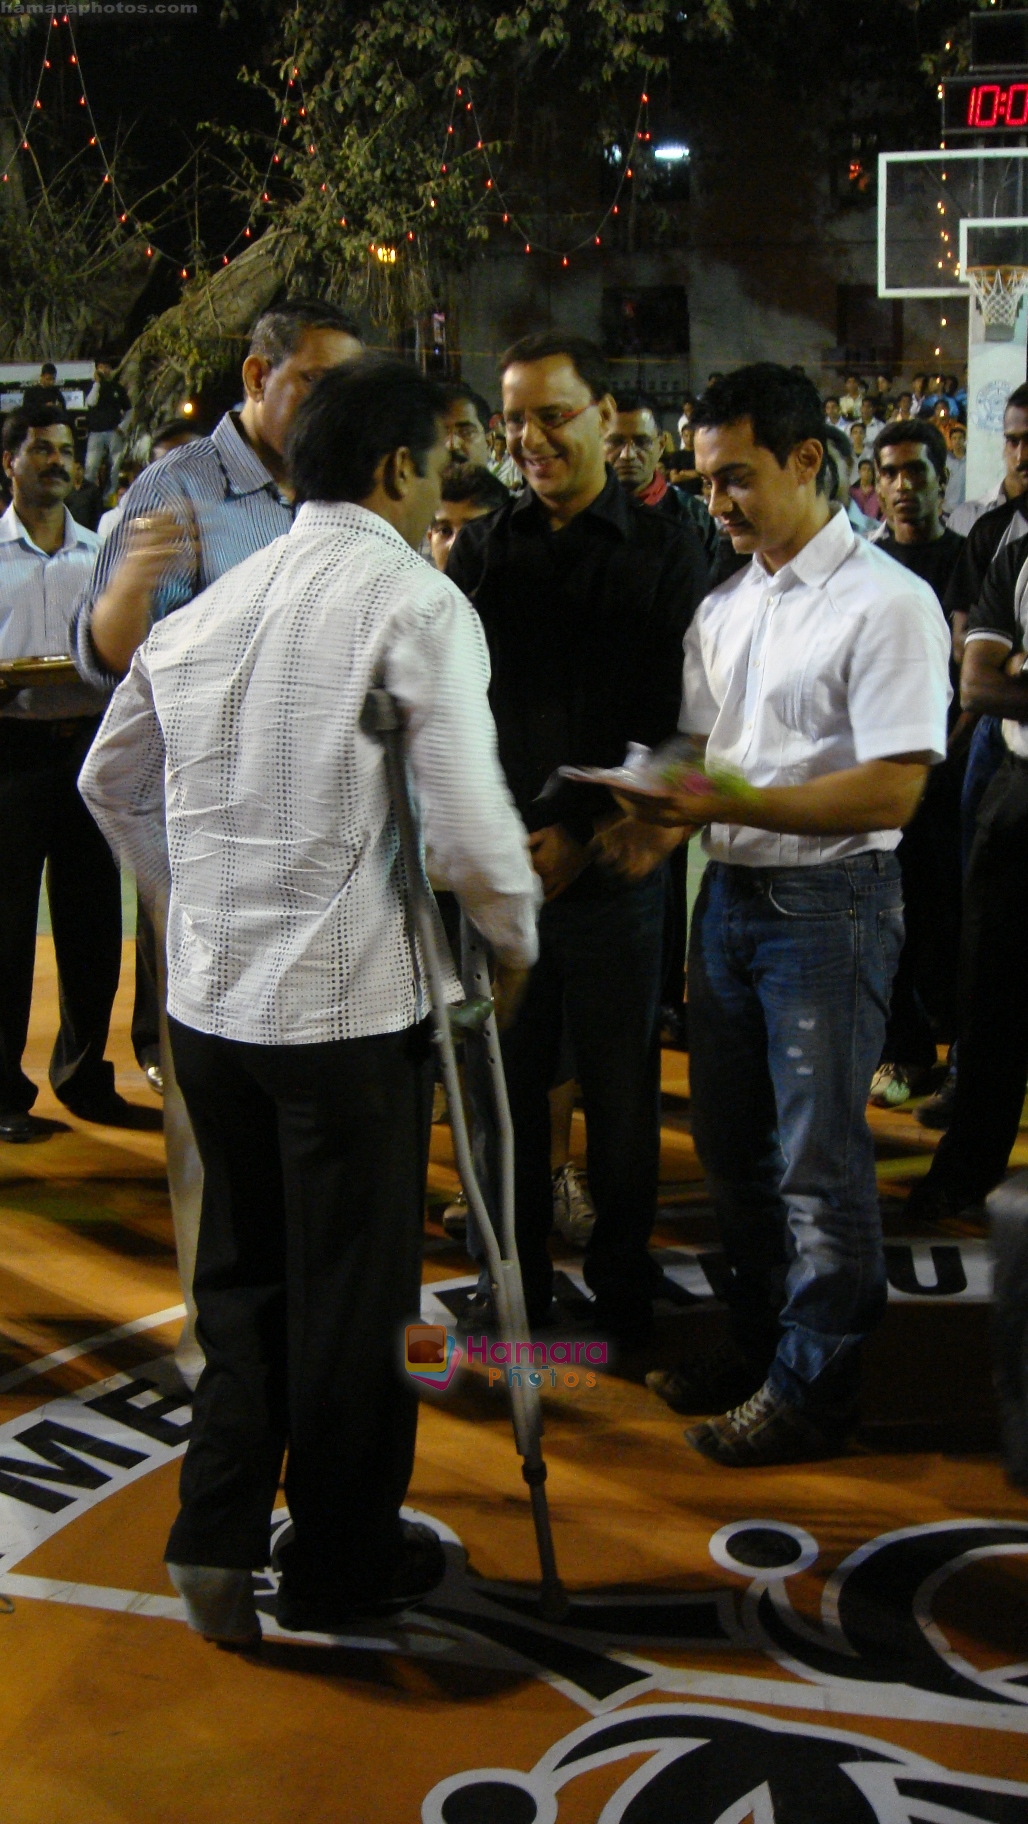 Vidhu Vinod Chopra and Aamir Khan salute the Heroes of 2611 at an event organized by the Mumbai Police in on 17th Feb 2009 